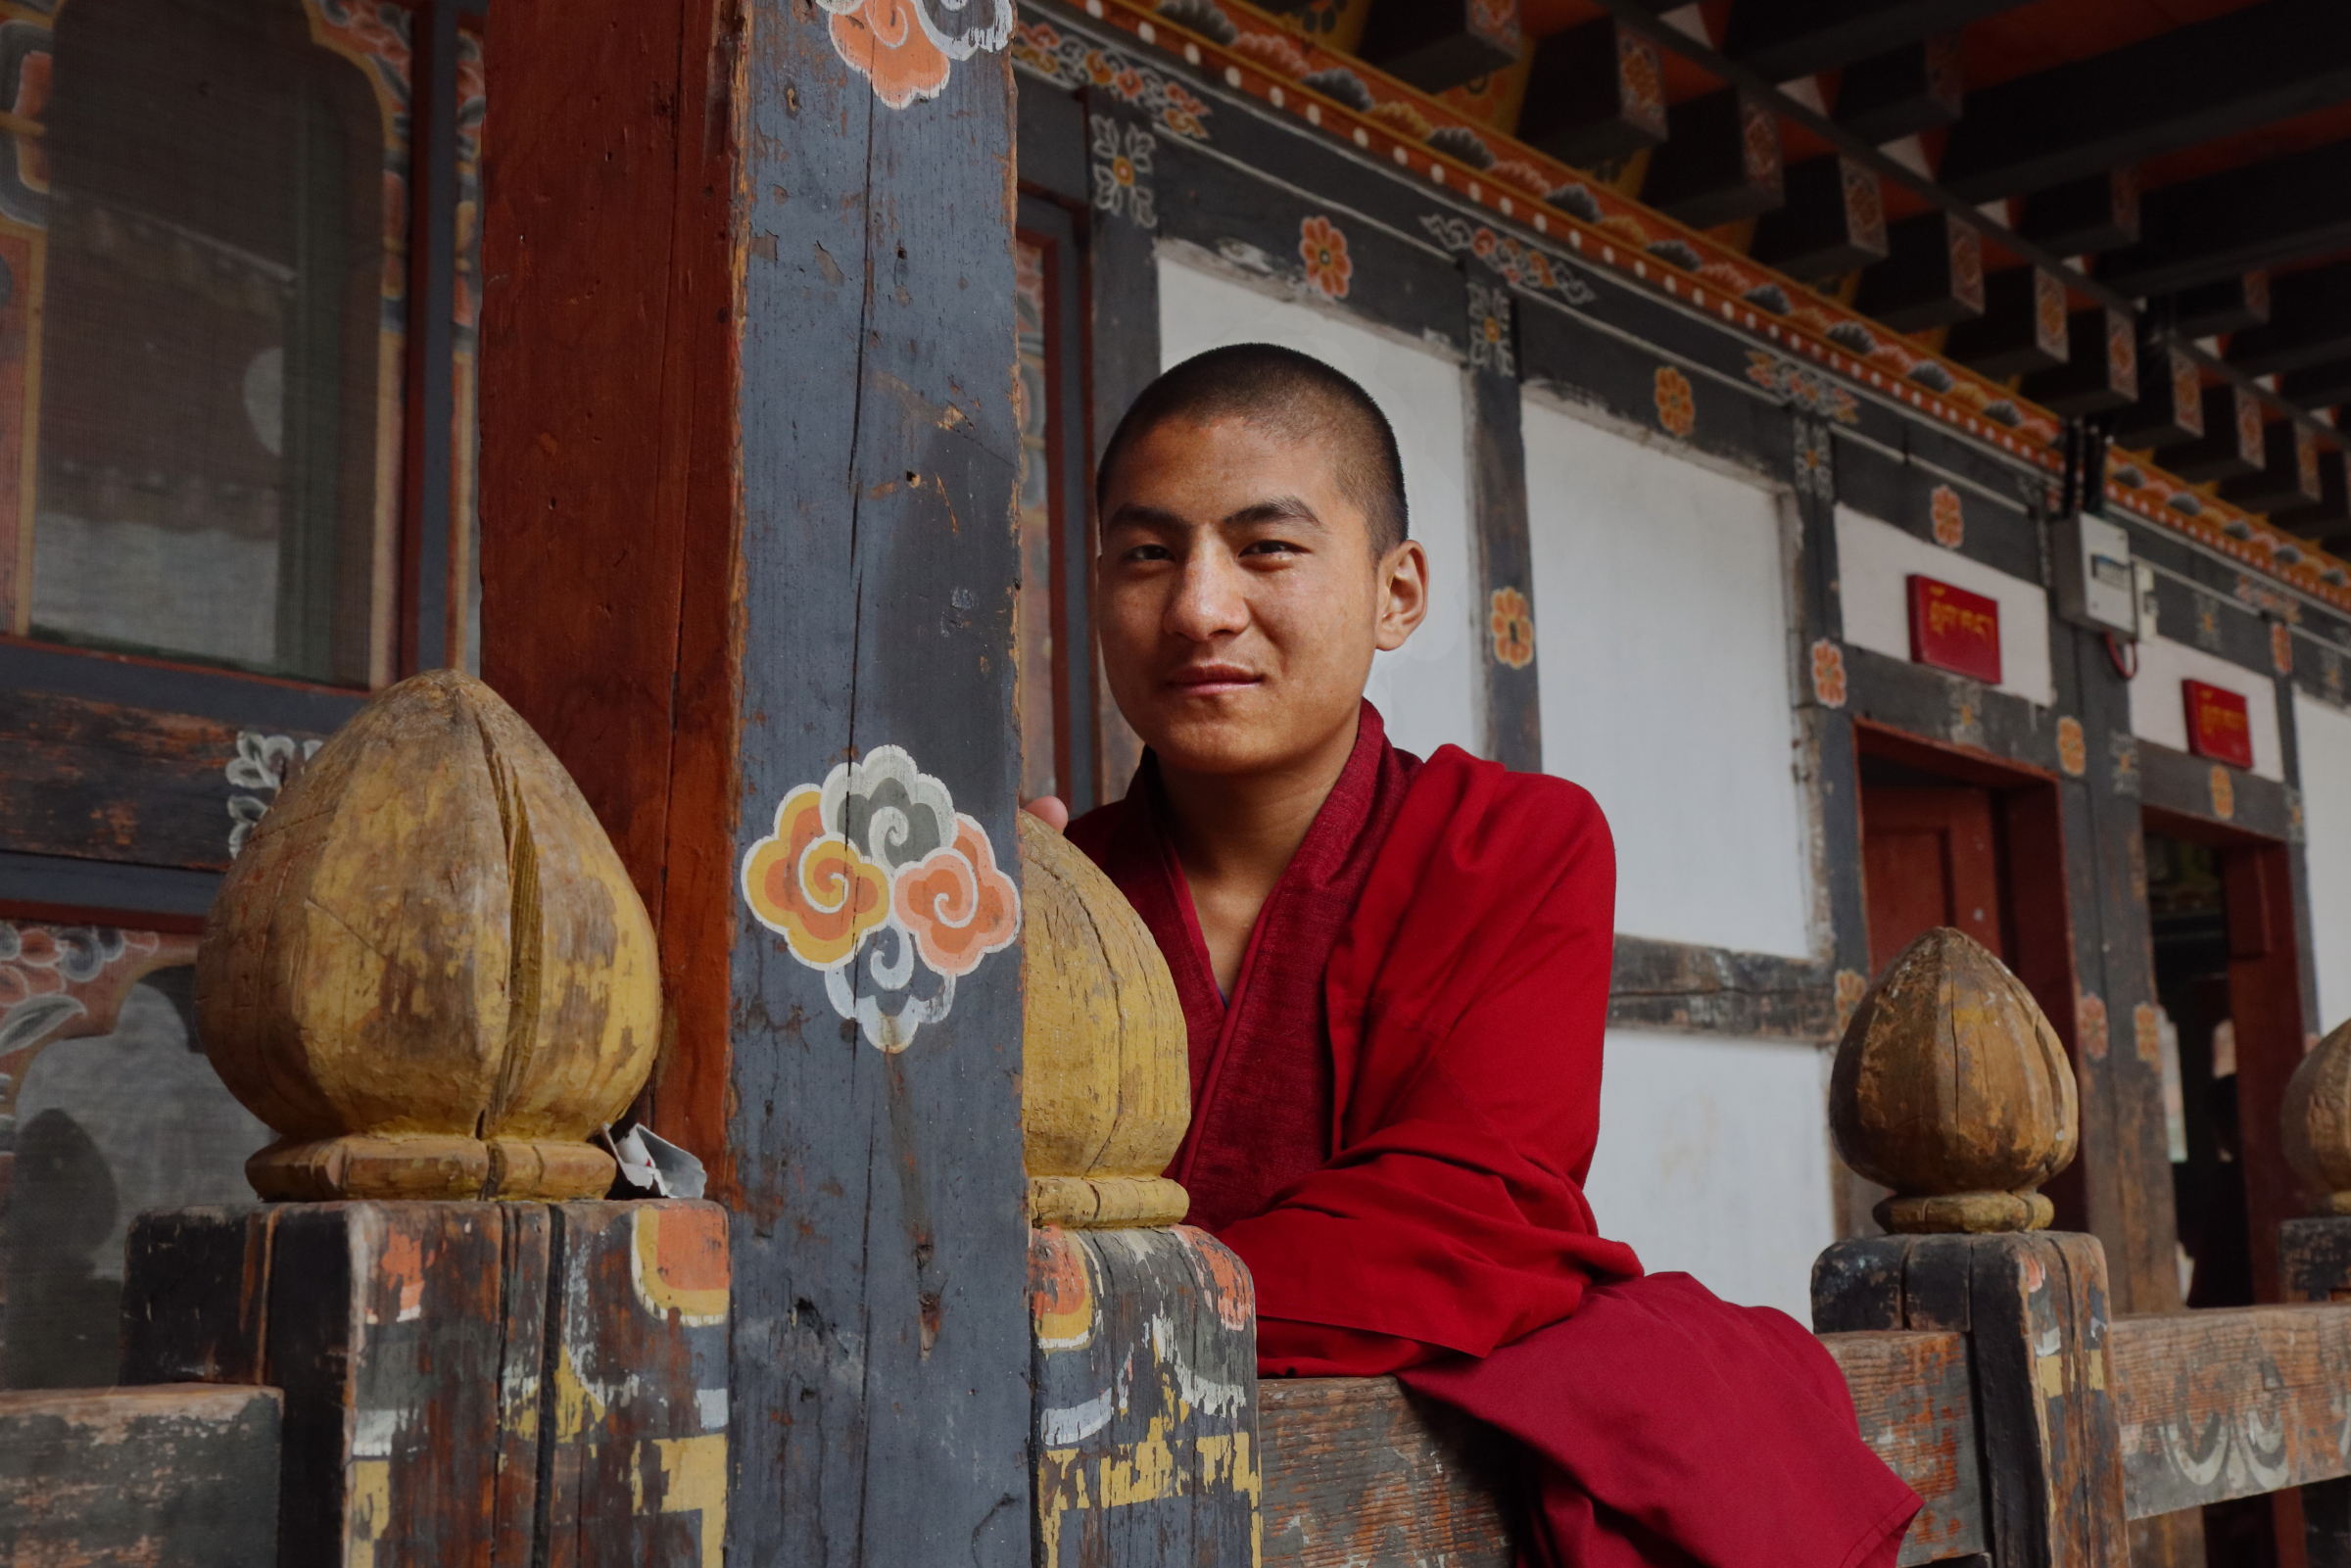 2nd image from my "Portrait from Bhutan" series. He is a young monk inside Khuruthang Monastery near Punakha. He loves football and his favourite fotballer is Lionel Messi.